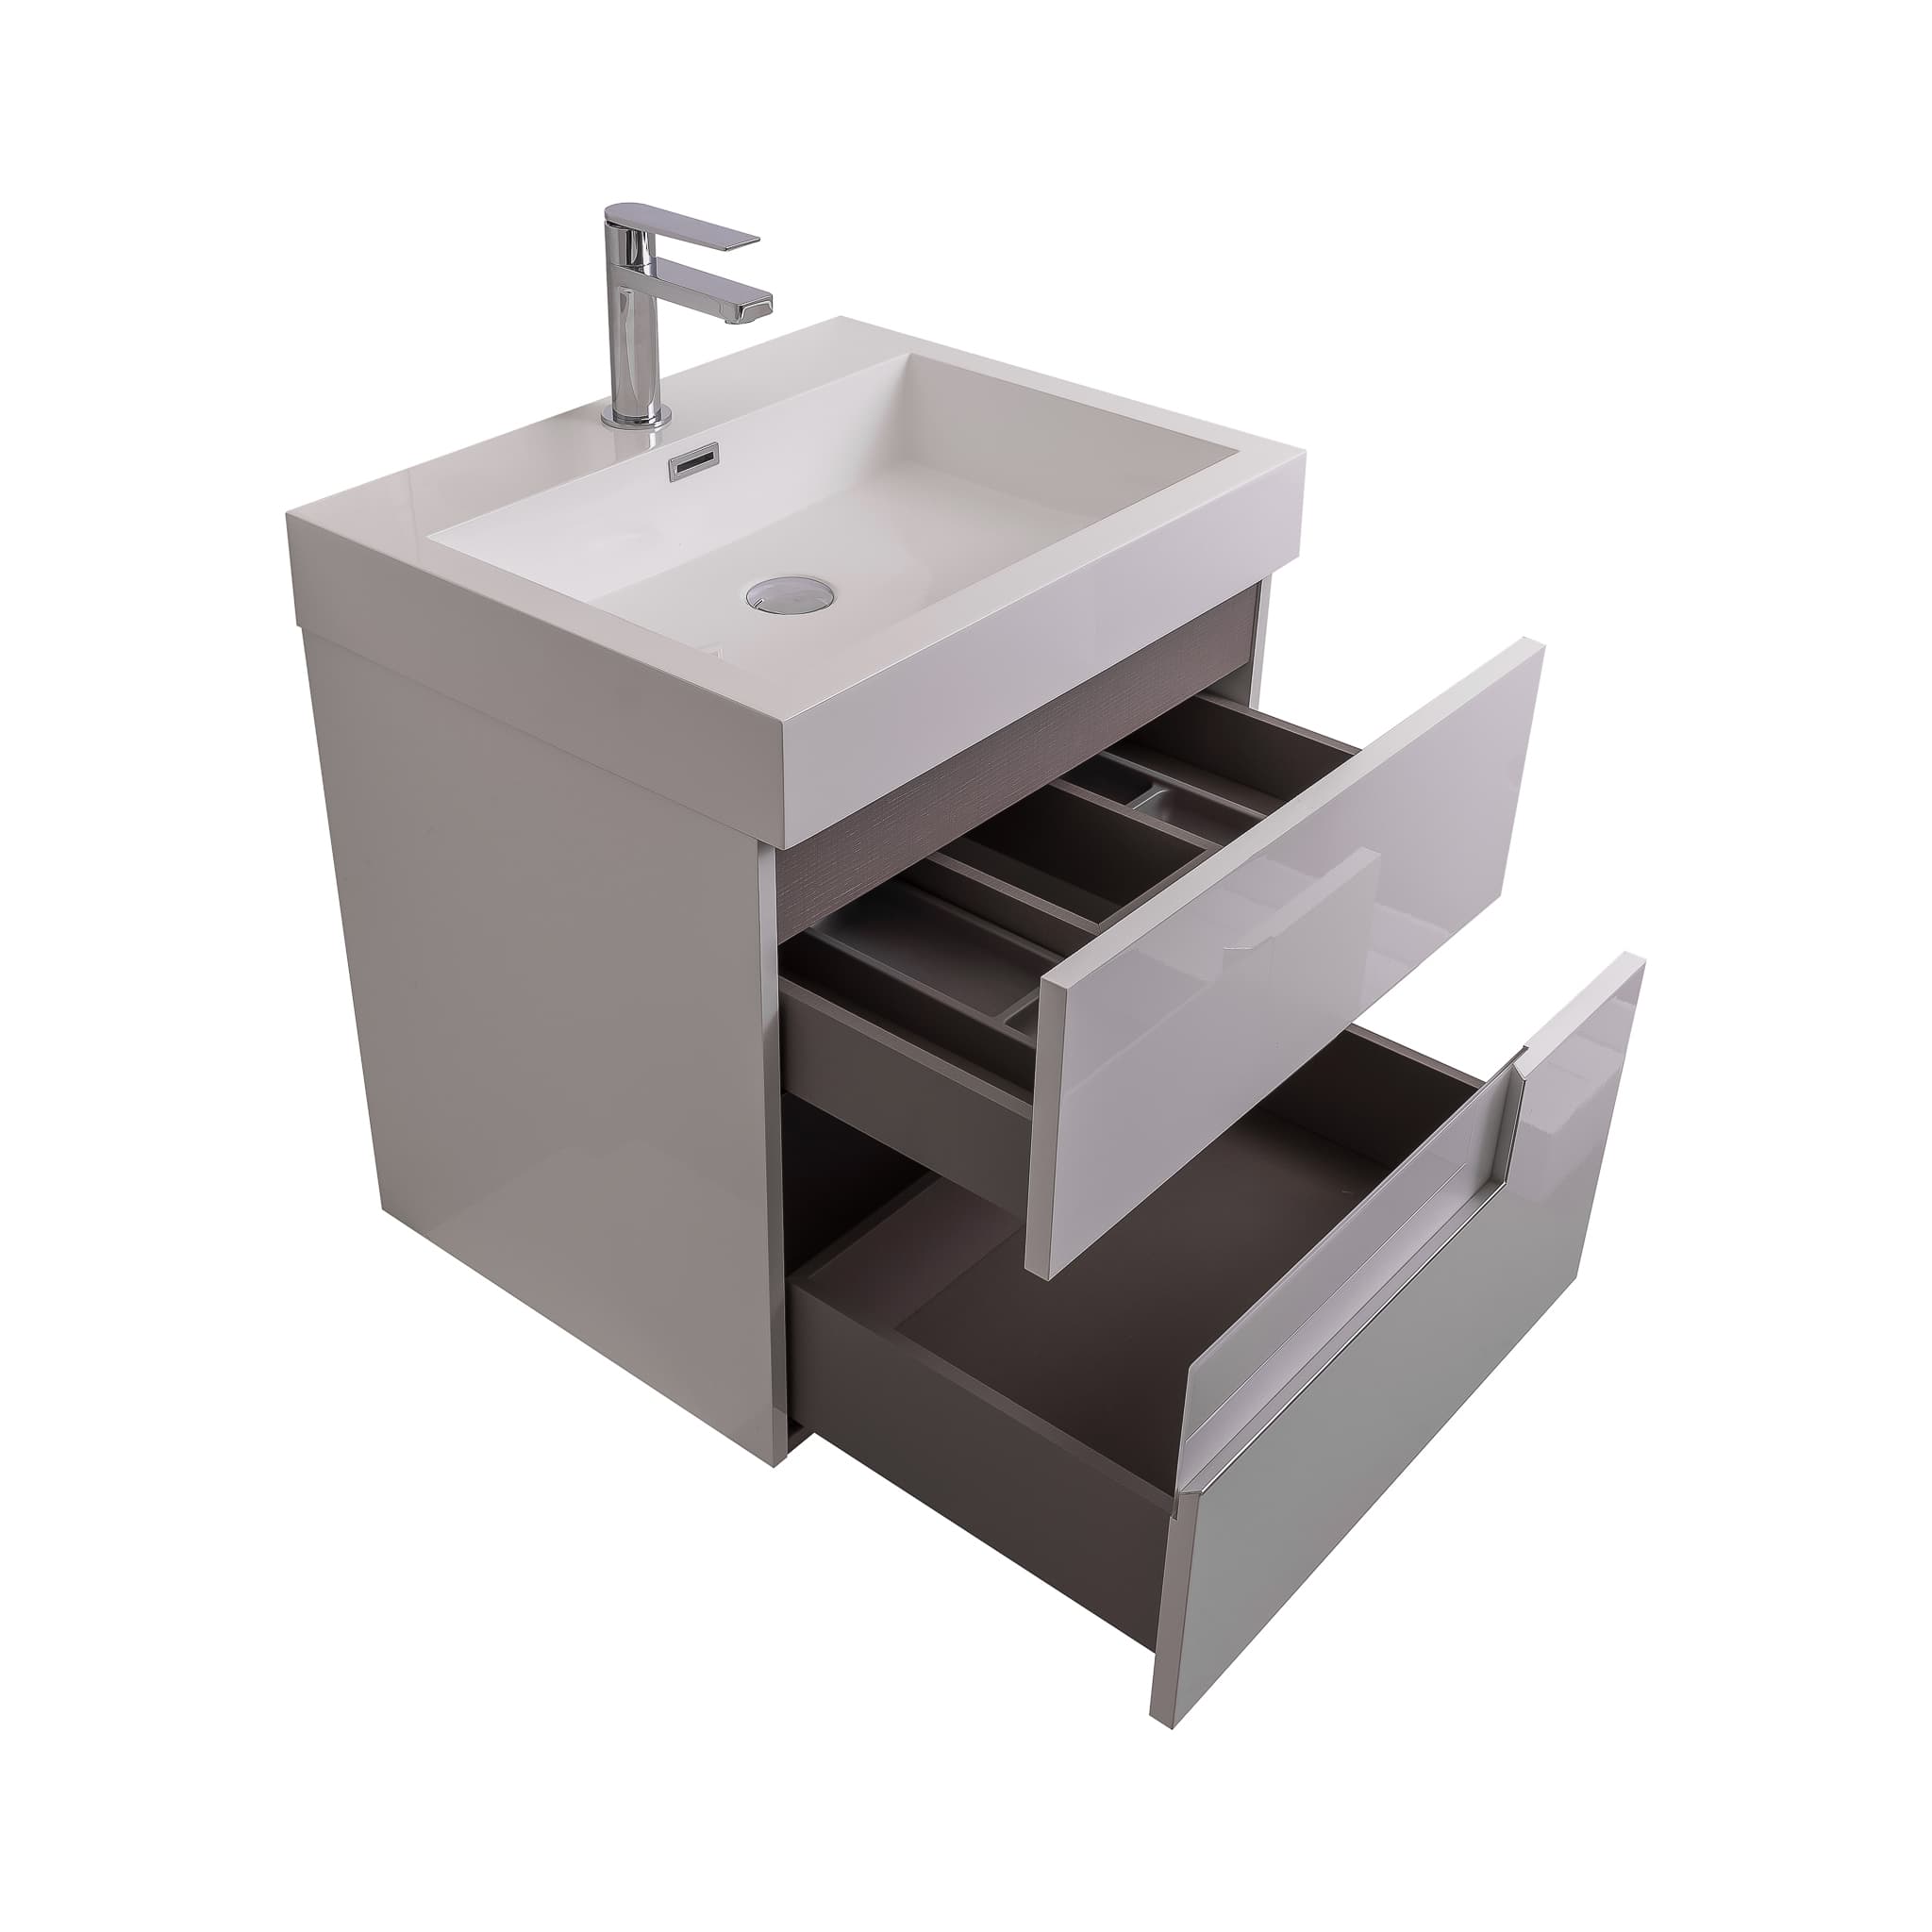 Vision 23.5 White High Gloss Cabinet, Square Cultured Marble Sink, Wall Mounted Modern Vanity Set